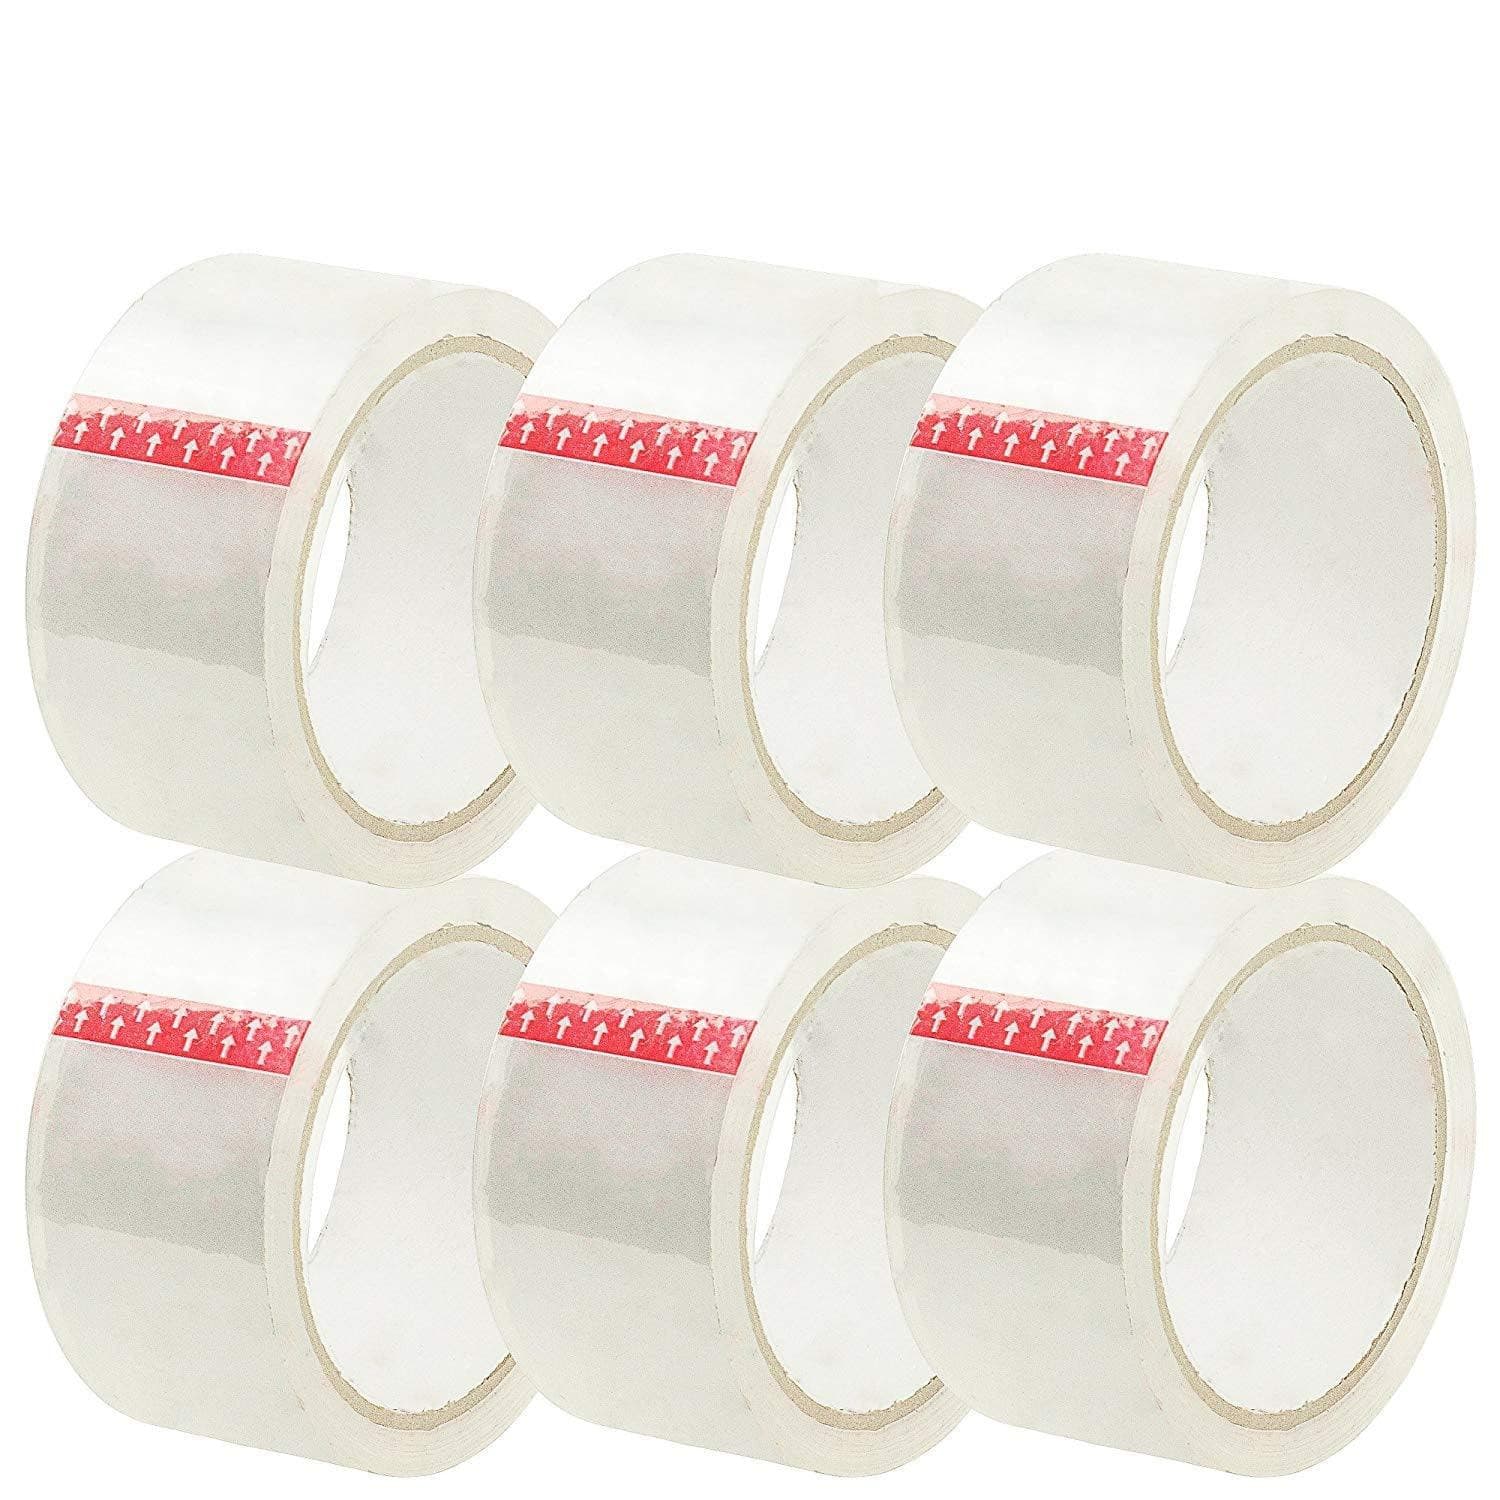 [36 Pack] Clear Packaging Sticky Tape Heavy Duty 48mm x 50m | 36 Value Pack | Packing Tapes - Office Catch